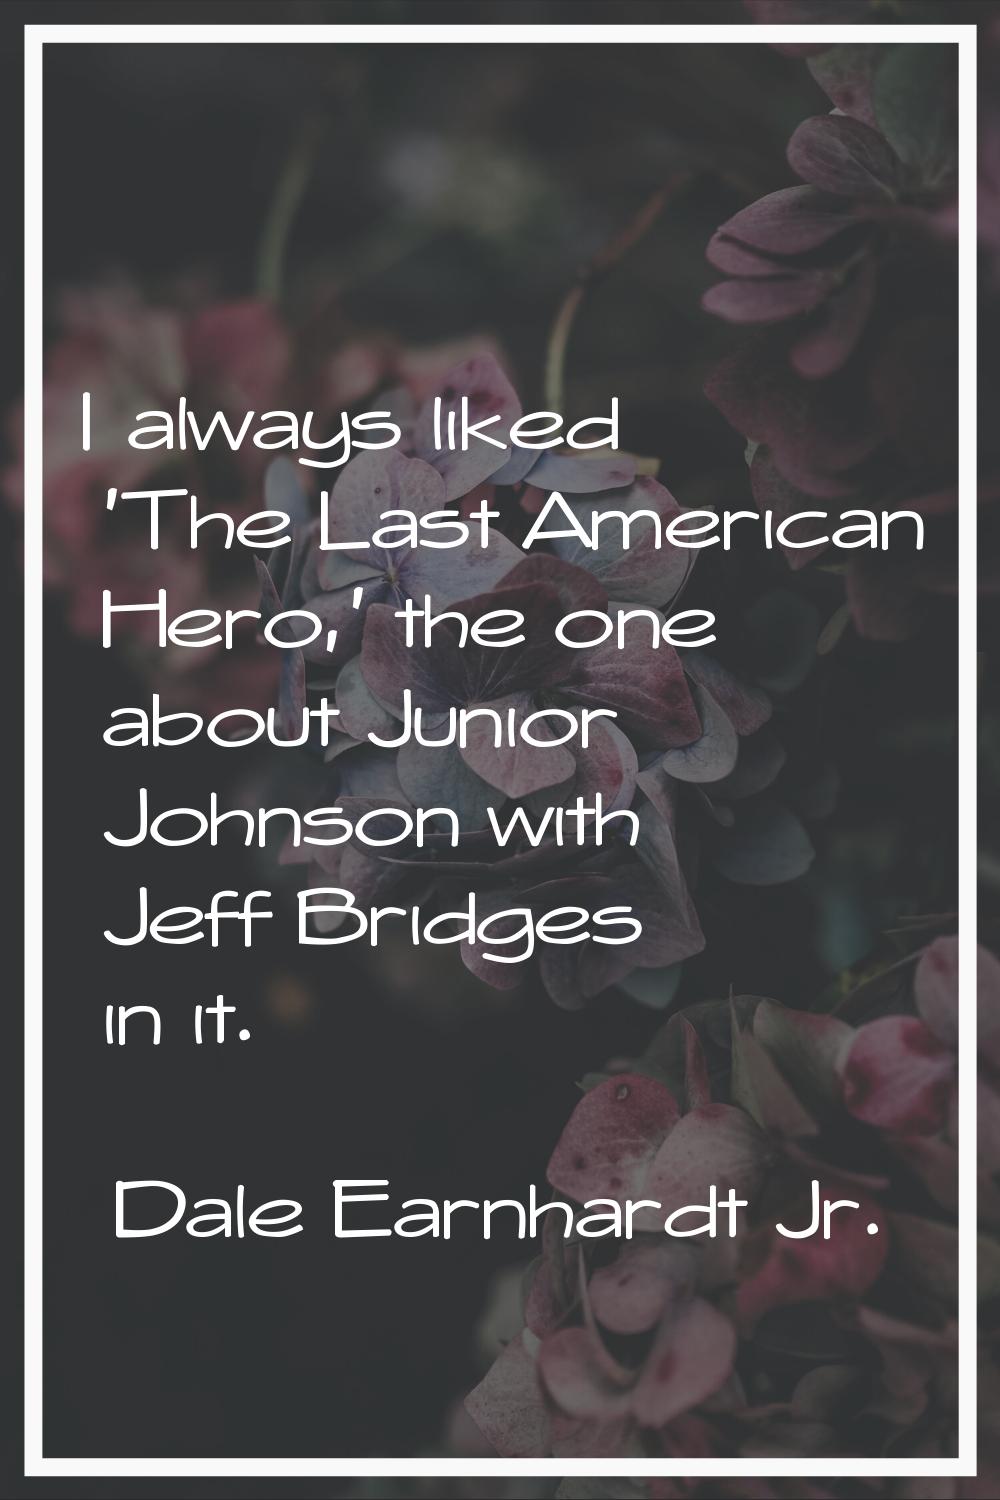 I always liked 'The Last American Hero,' the one about Junior Johnson with Jeff Bridges in it.